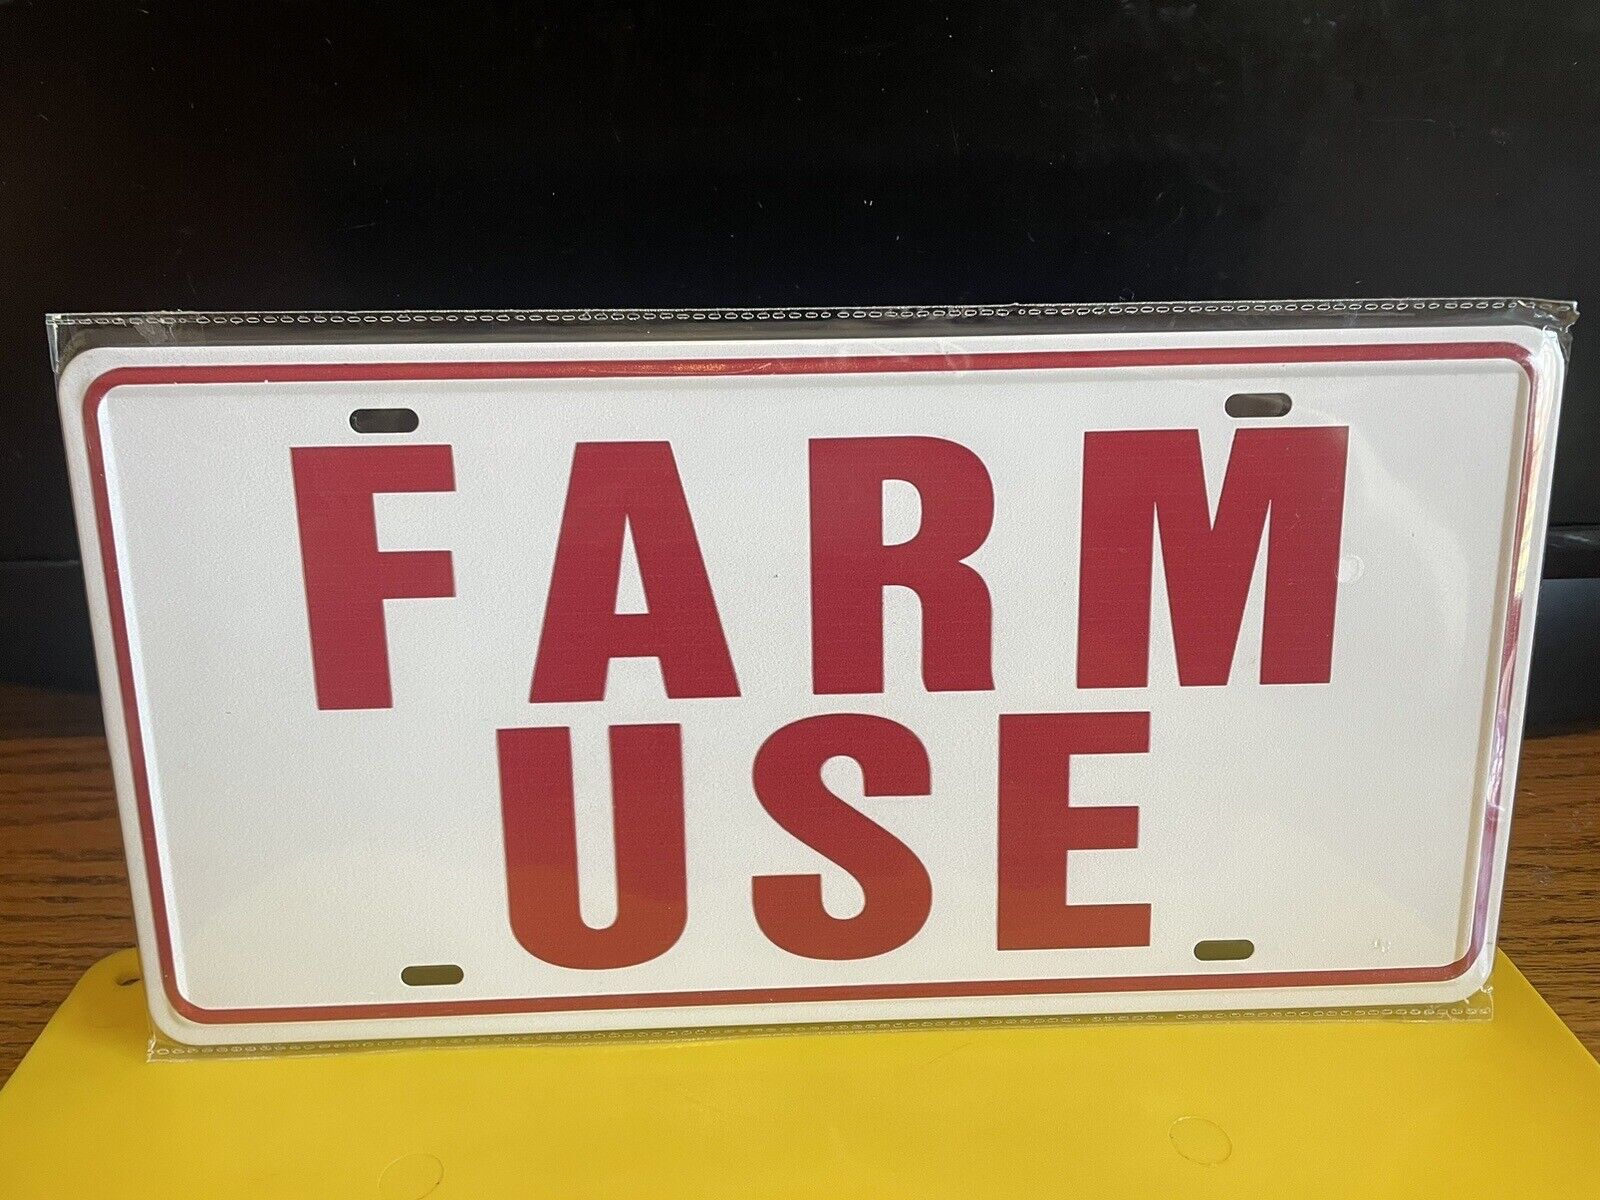 FARM USE UNIVERSAL METAL LICENSE PLATE NEW IN PLASTIC FOR TRACTOR/TRUCK Made USA